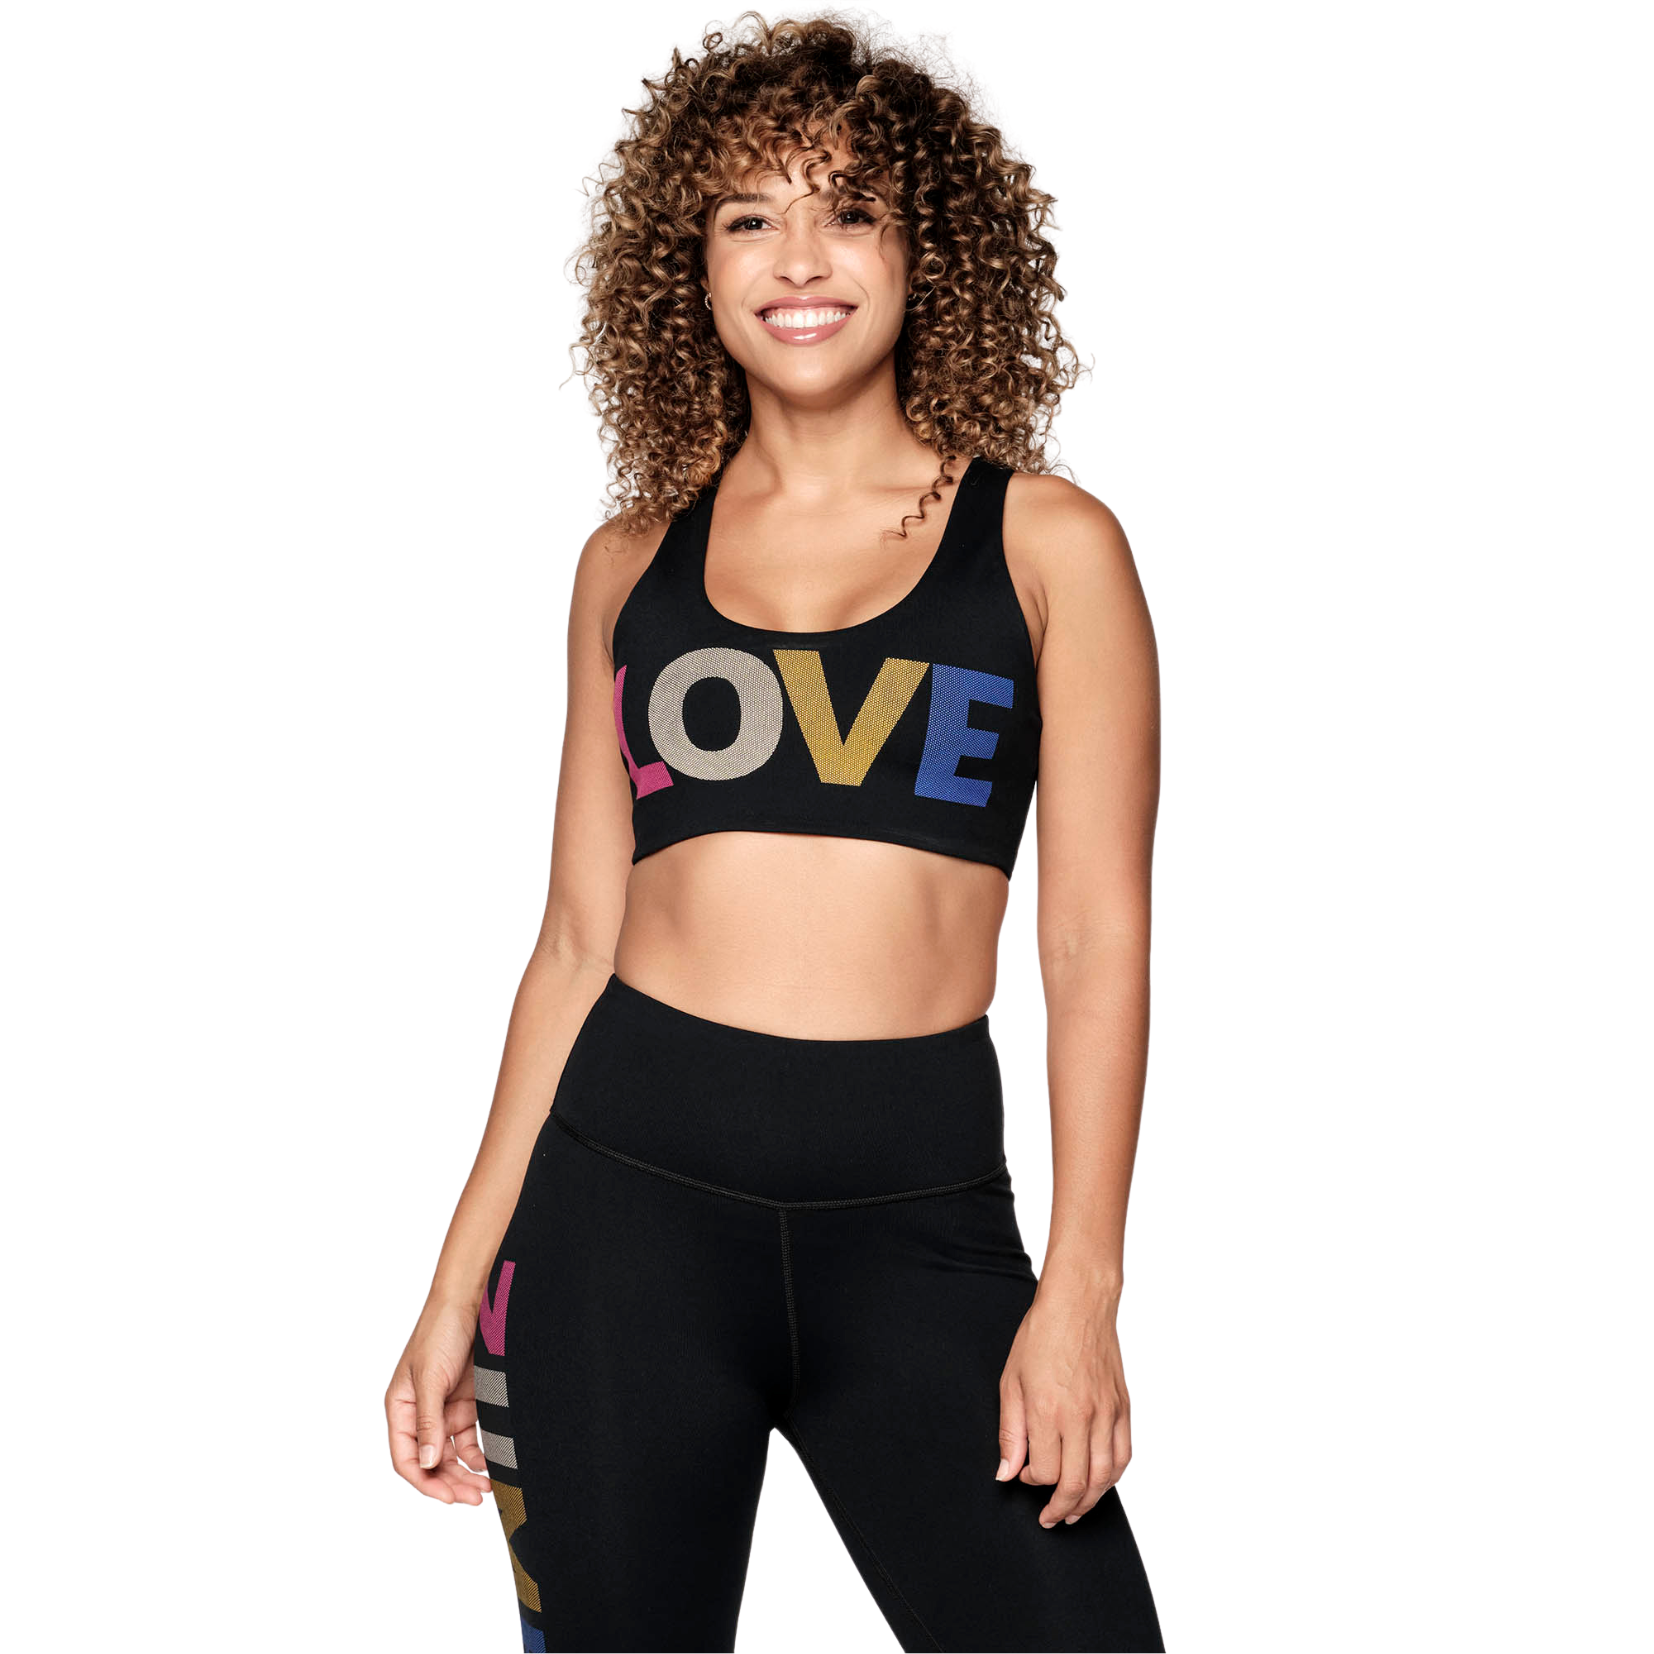 For the Love of Zumba Bra (Special Order)